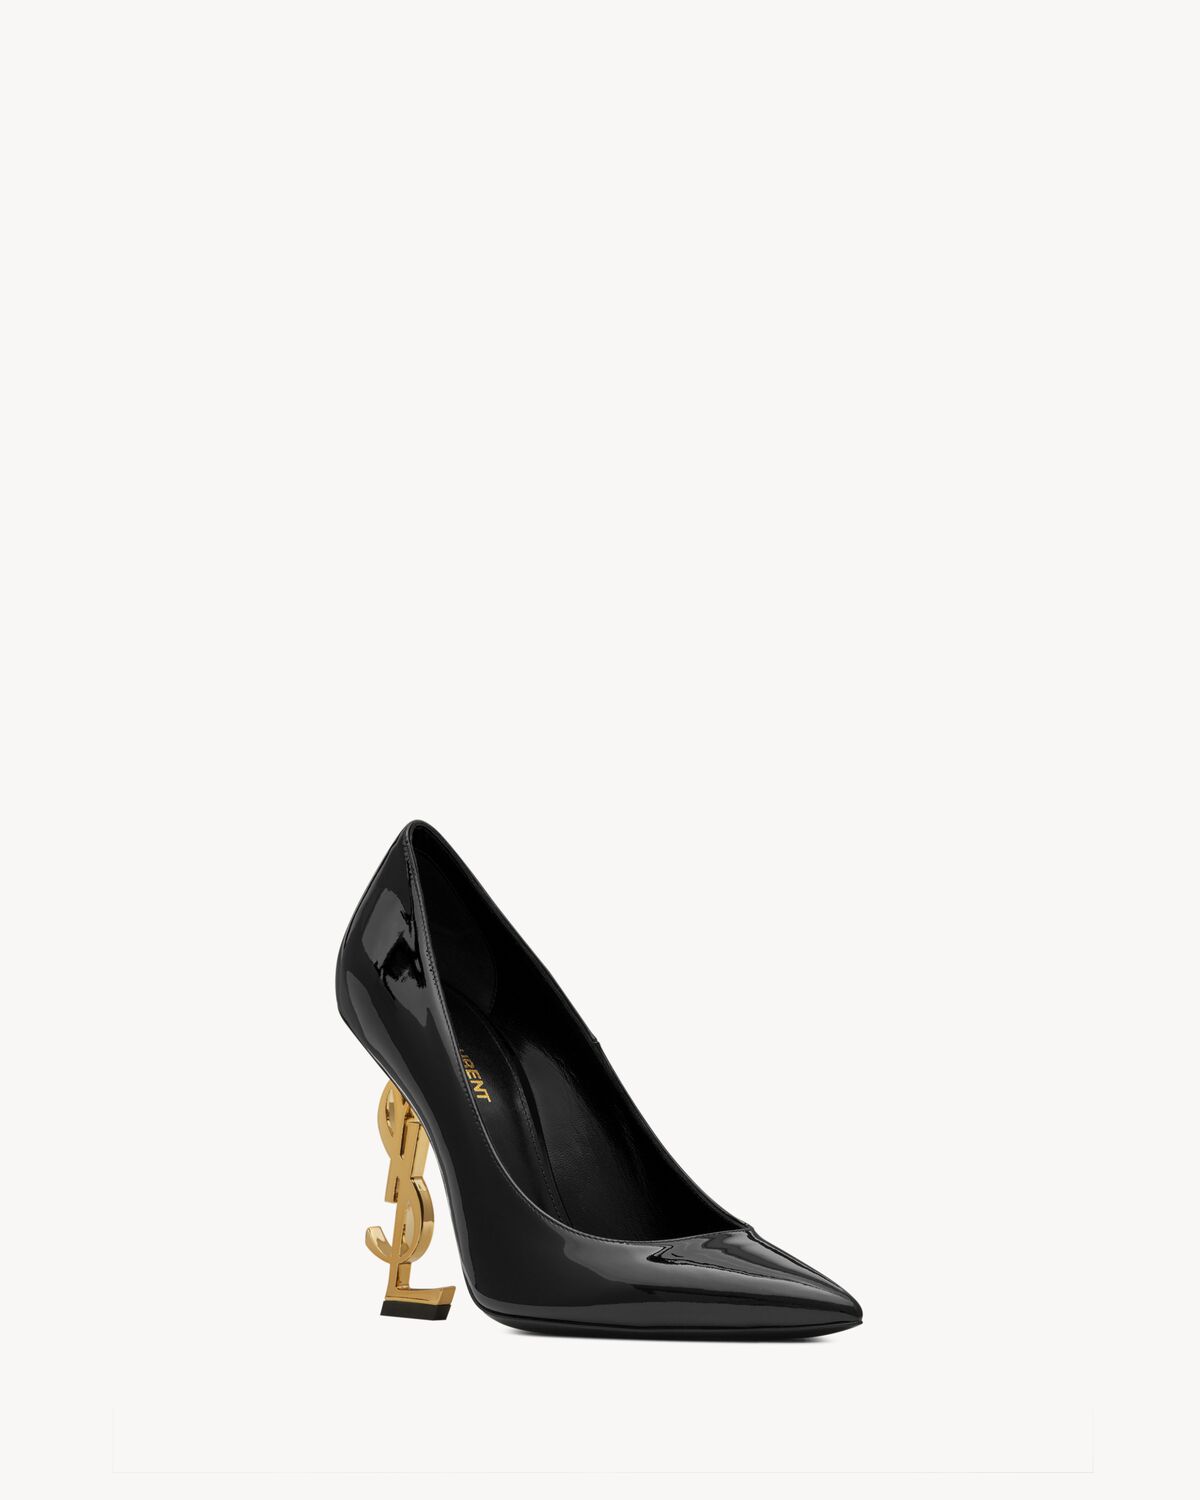 OPYUM Pumps in patent leather